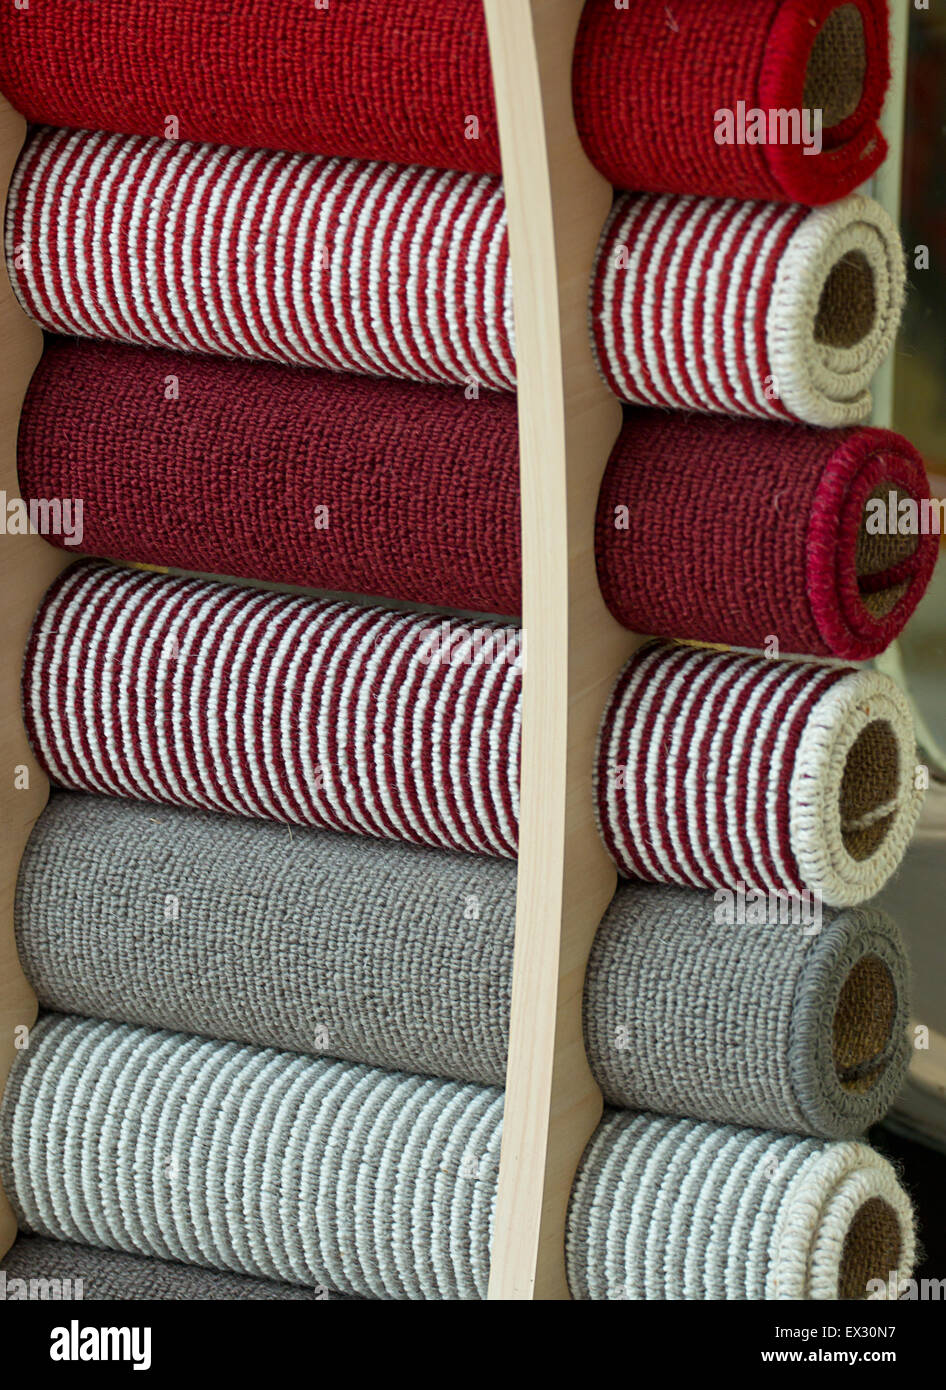 Selection of carpet samples to choose the perfect match for decorating your home interior. Stock Photo